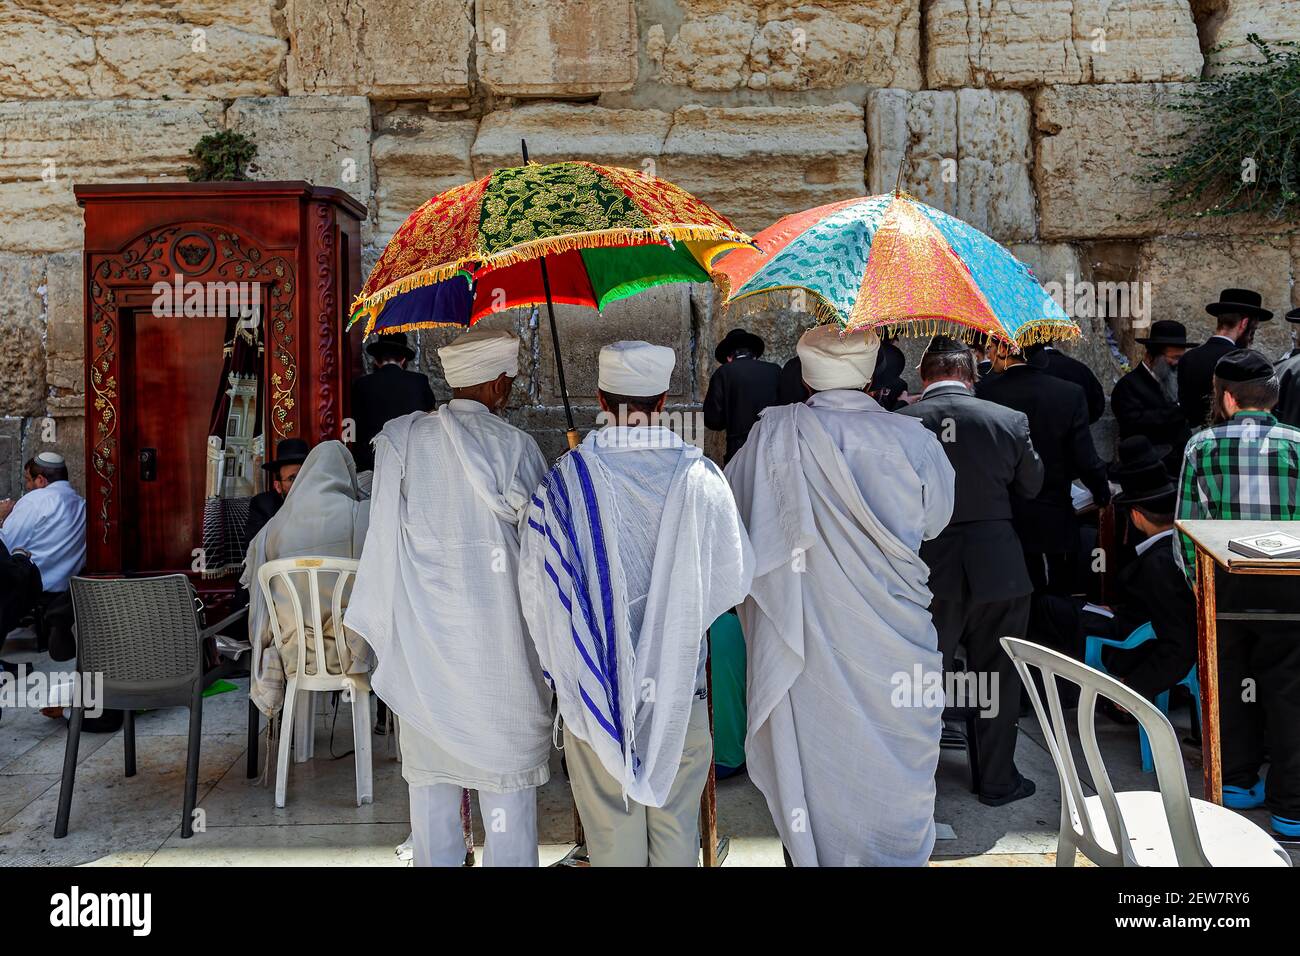 People praying at Western Wall in Jerusalem on Tisha B'Av - annual fast day in Judaism. Stock Photo